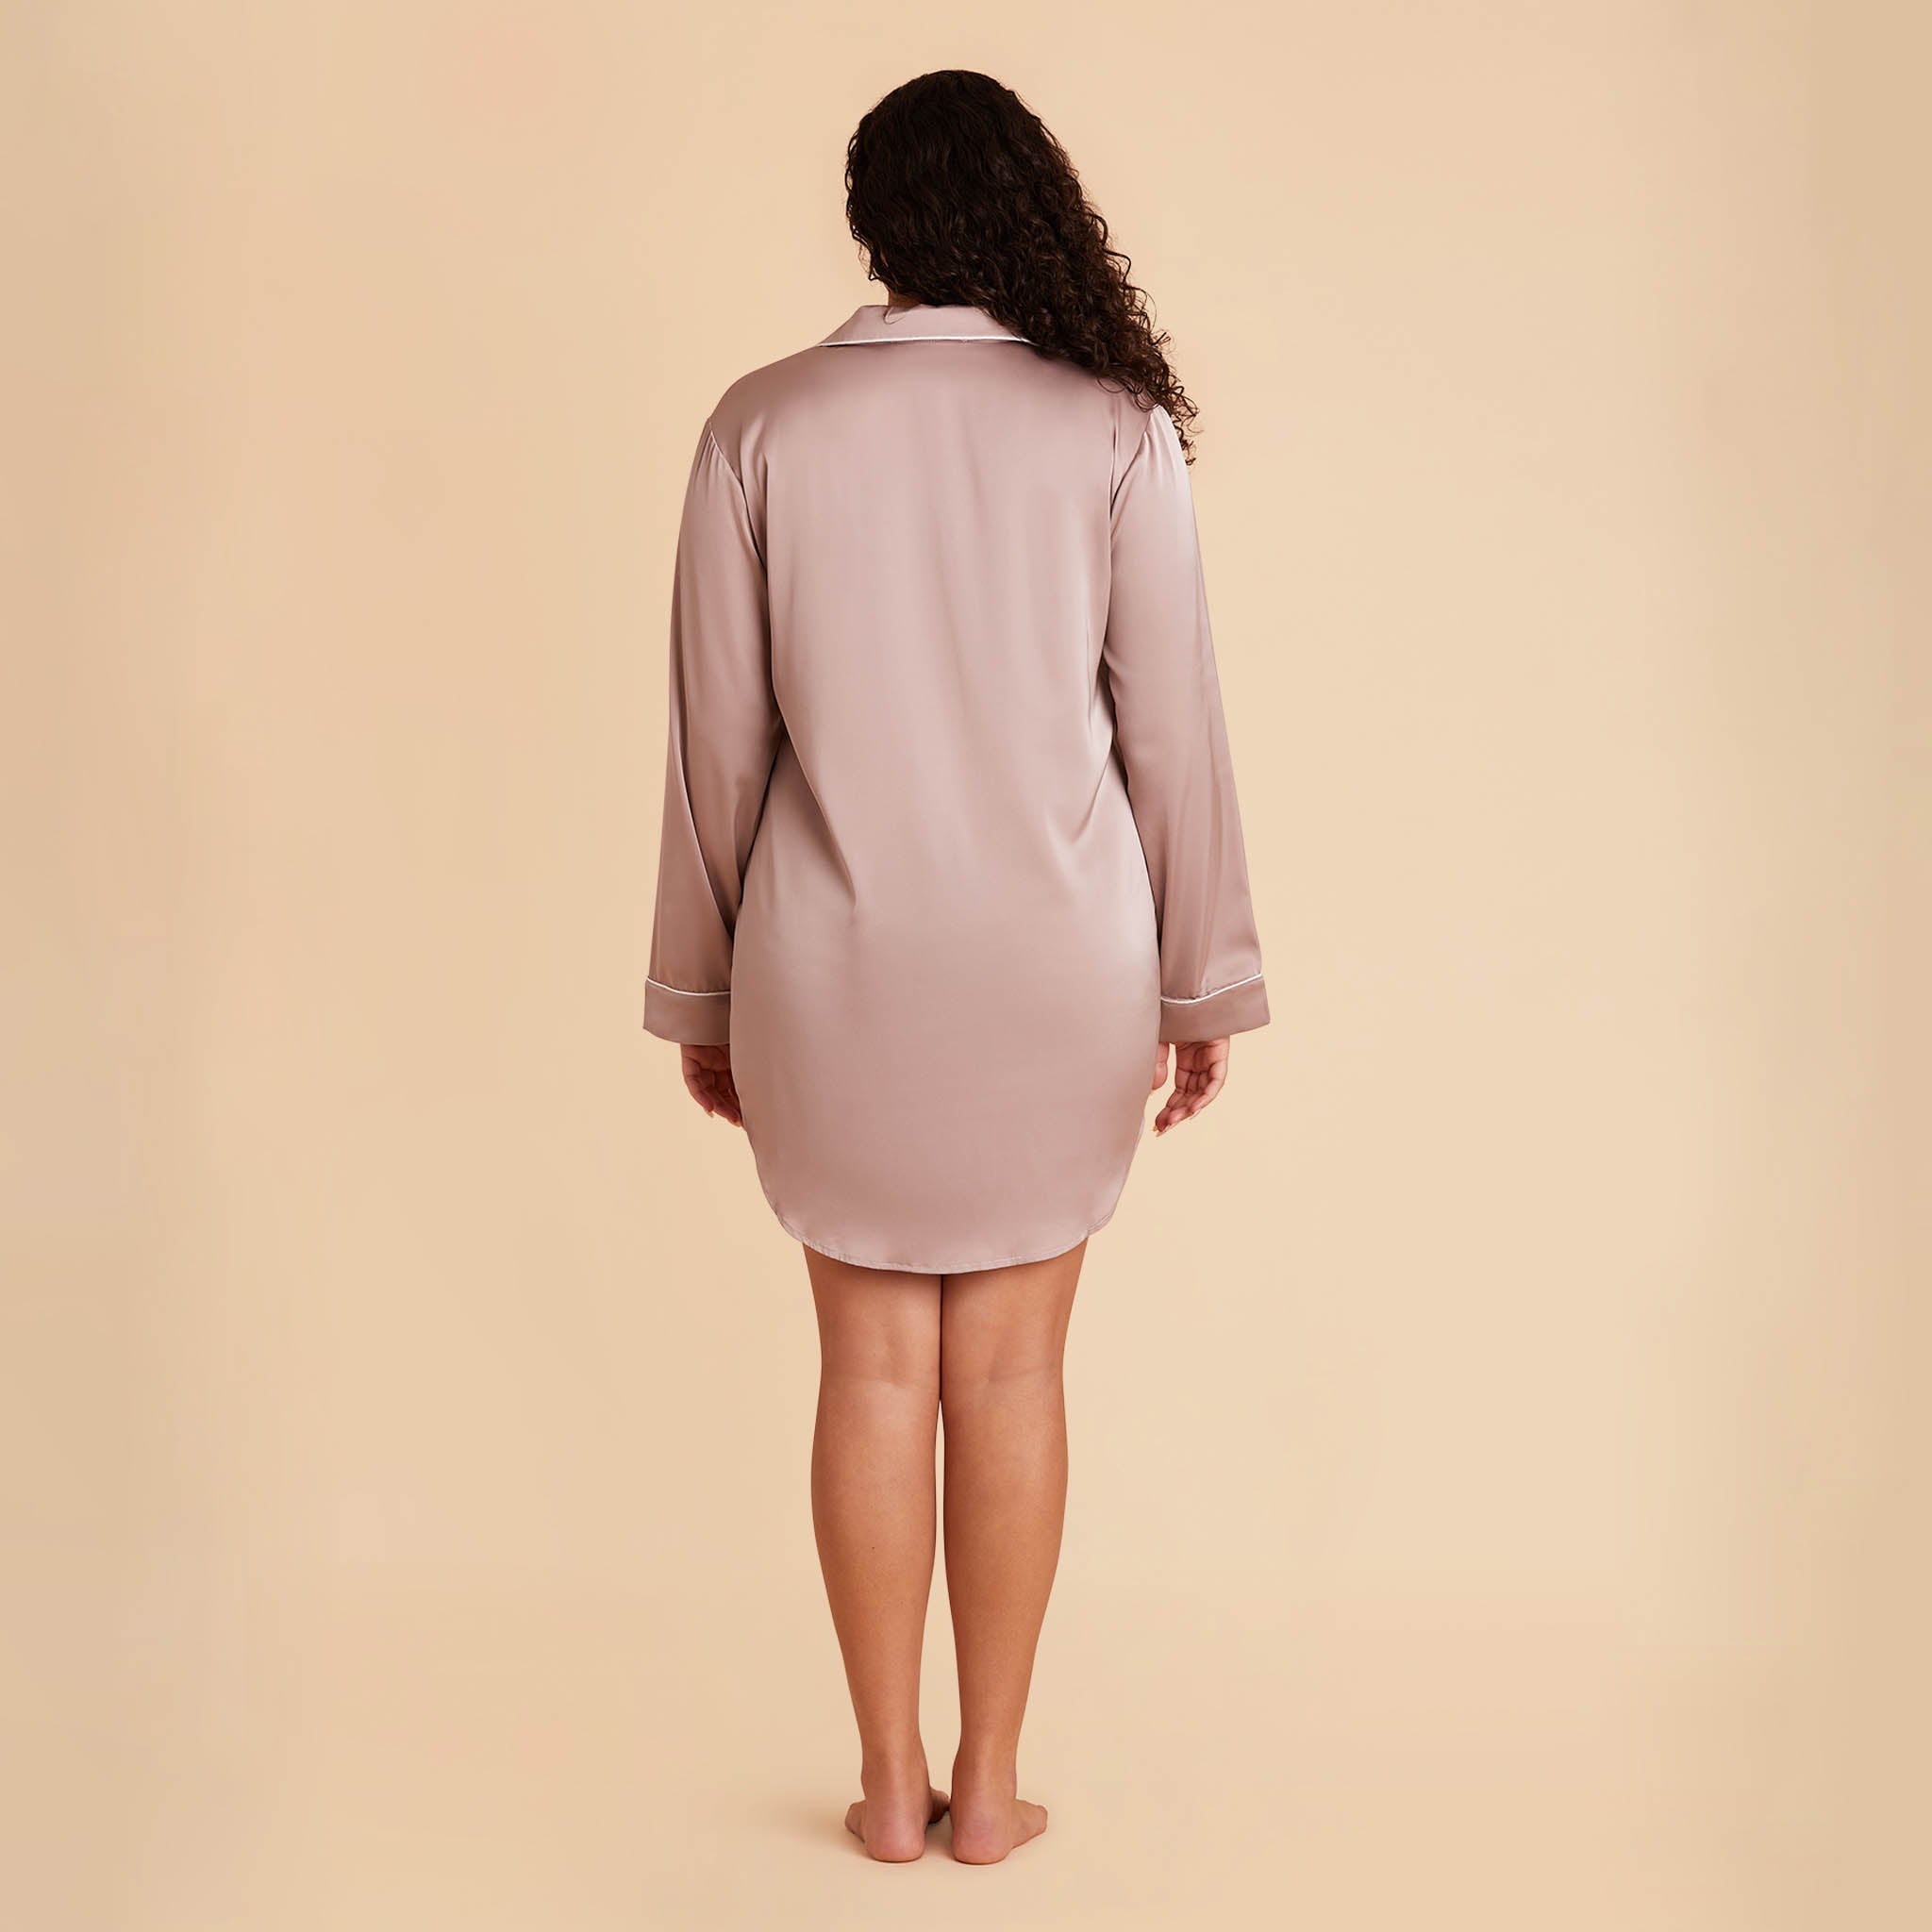 Plus Size Satin Sleepshirt in mauve taupe by Birdy Grey, back view